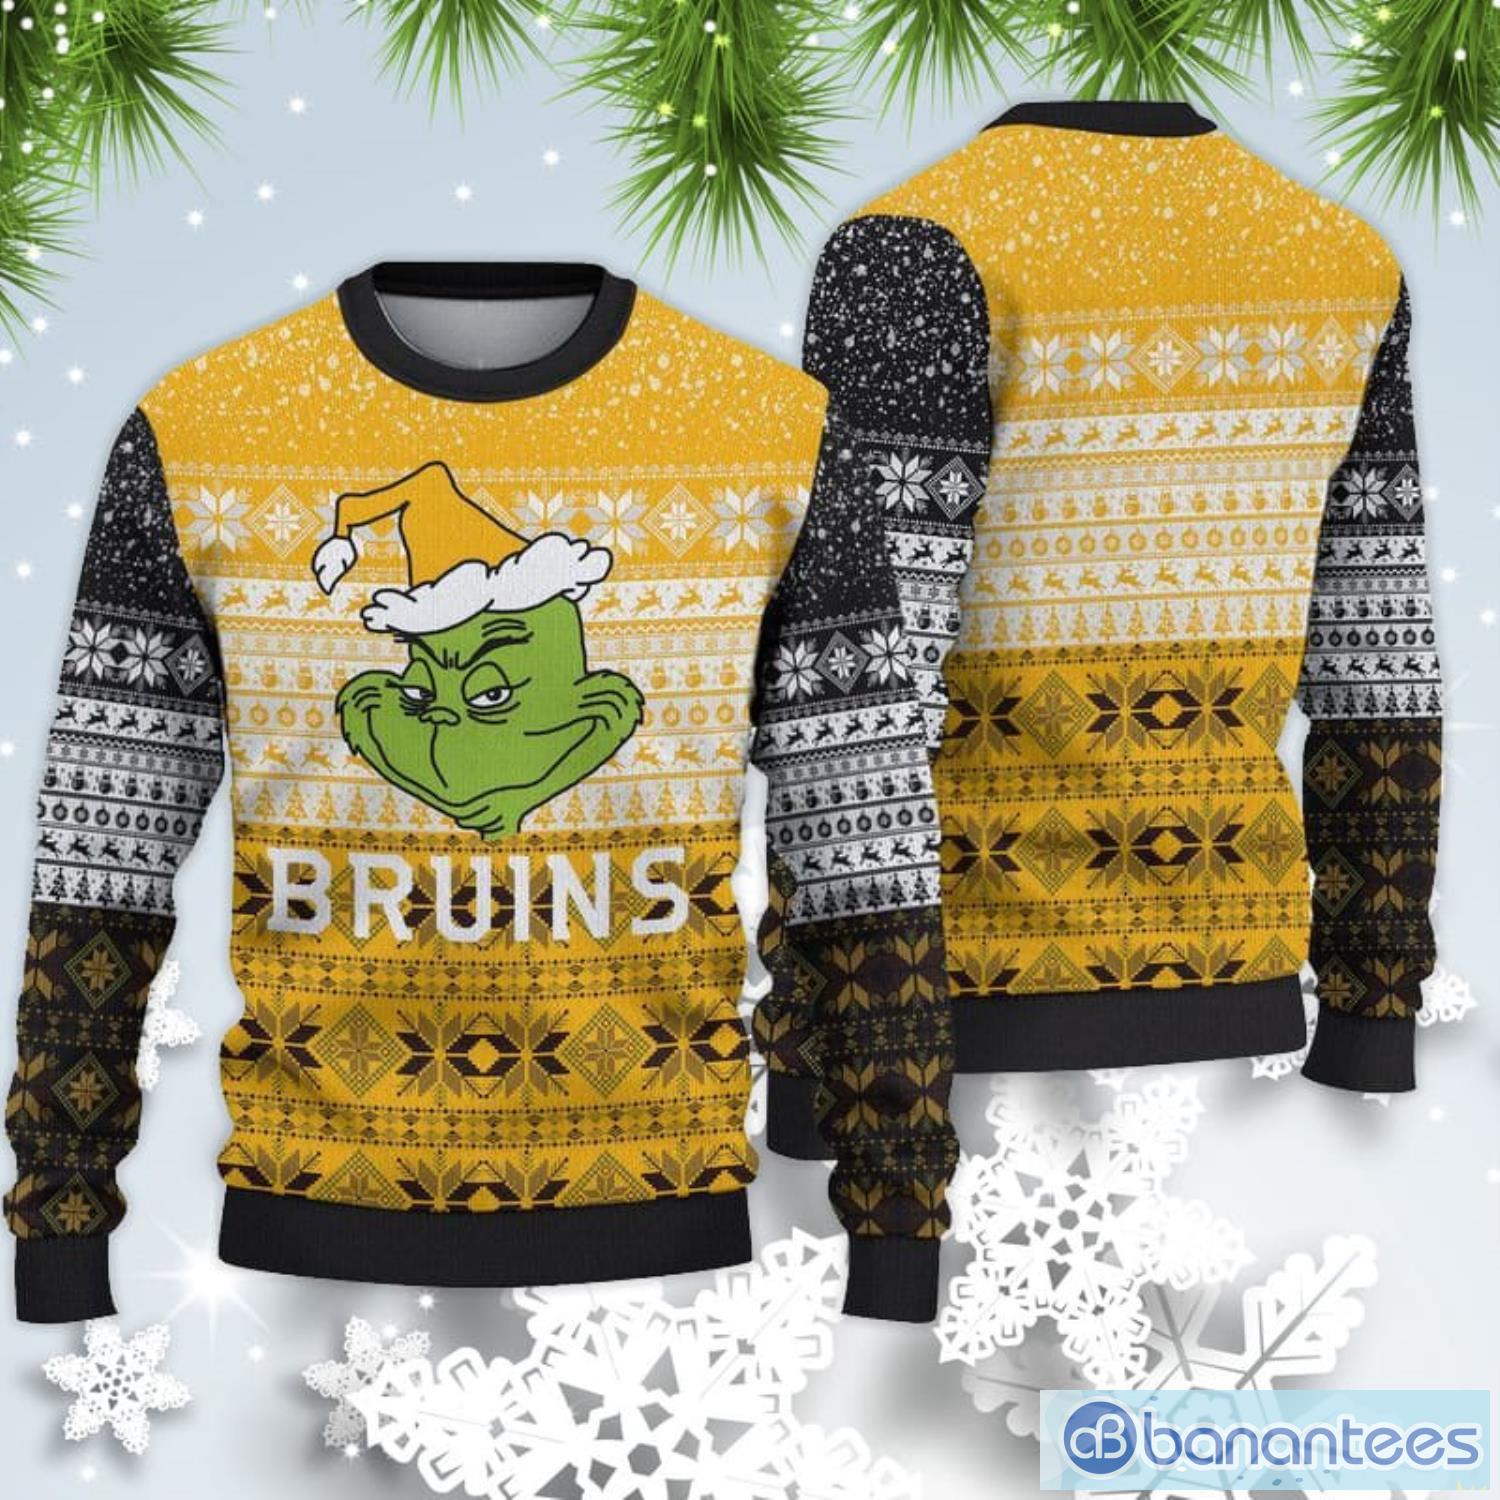 Boston Bruins Ugly Christmas Sweater Unforgettable Santa Claus Bruins Gift  - Personalized Gifts: Family, Sports, Occasions, Trending